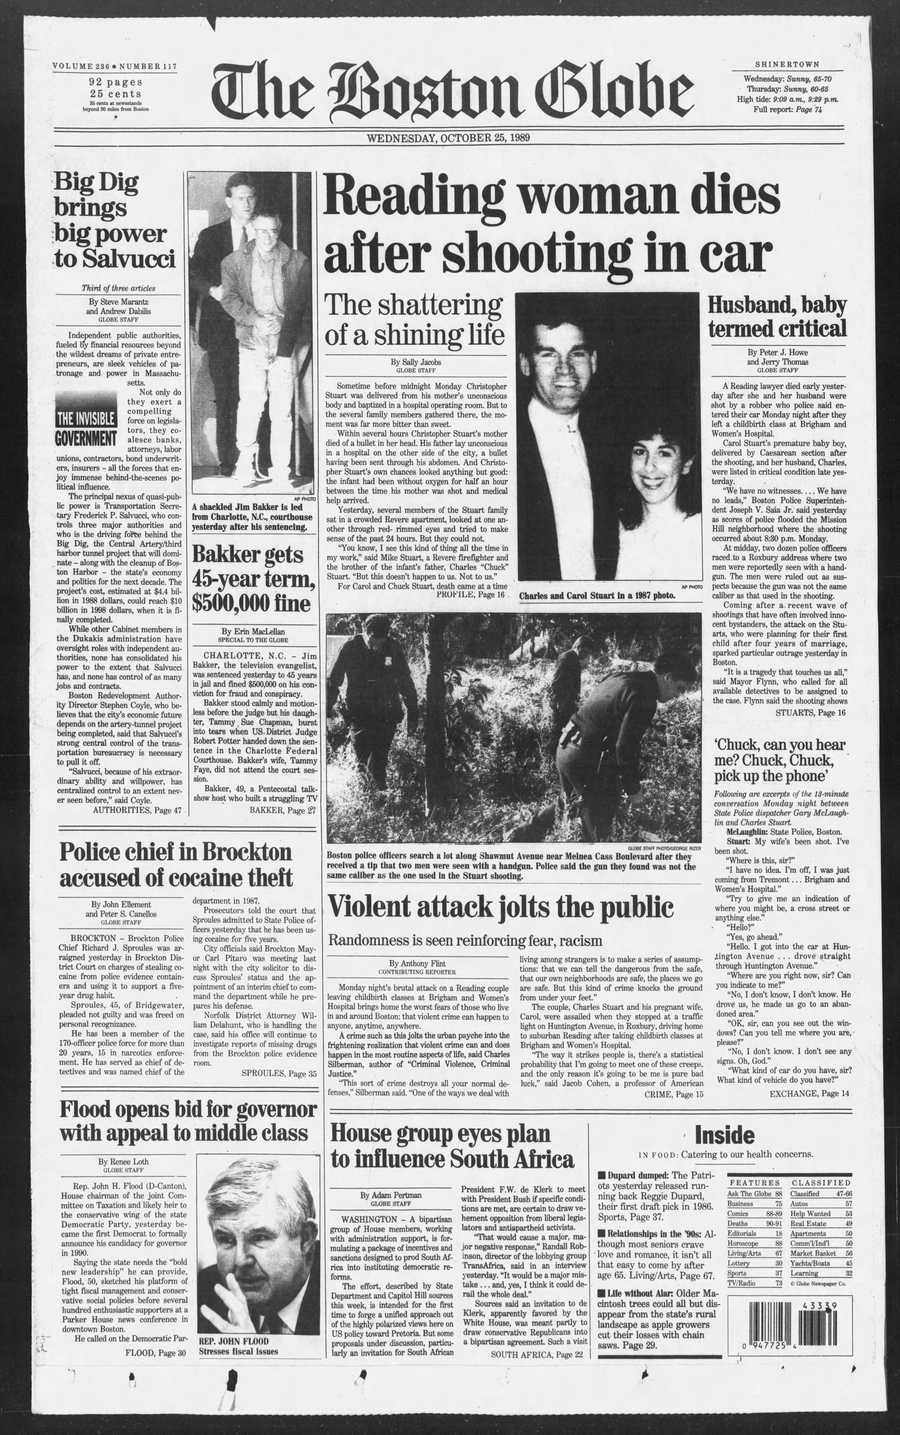 Front page of The Boston Globe, Oct. 25, 1989. Lead headline reads "Reading woman dies after shooting in car."